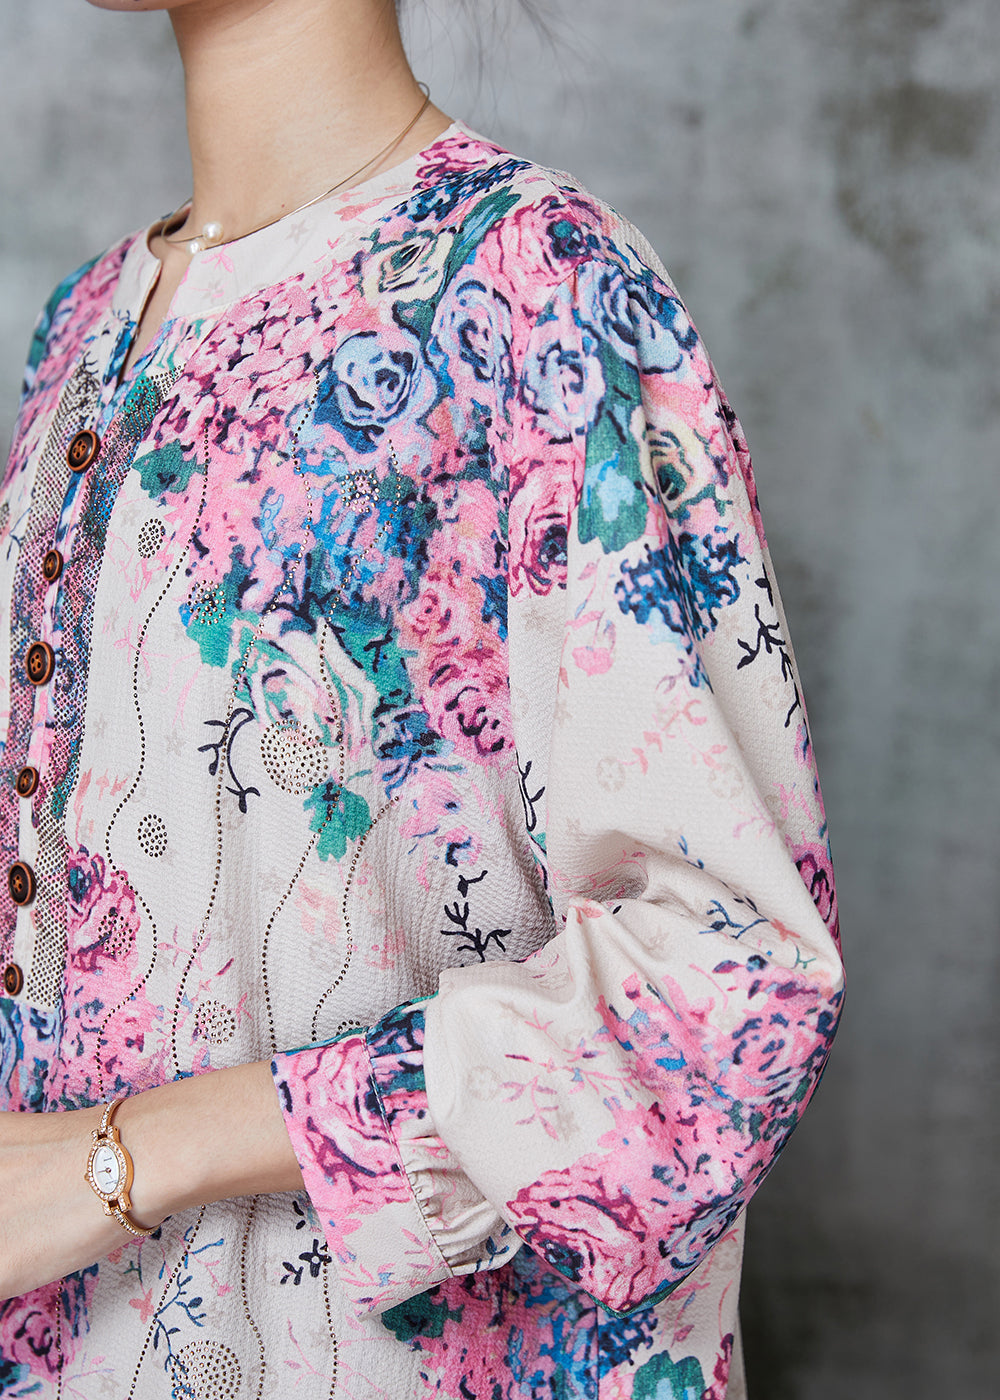 Style Pink Oversized Print Cotton Shirt Spring